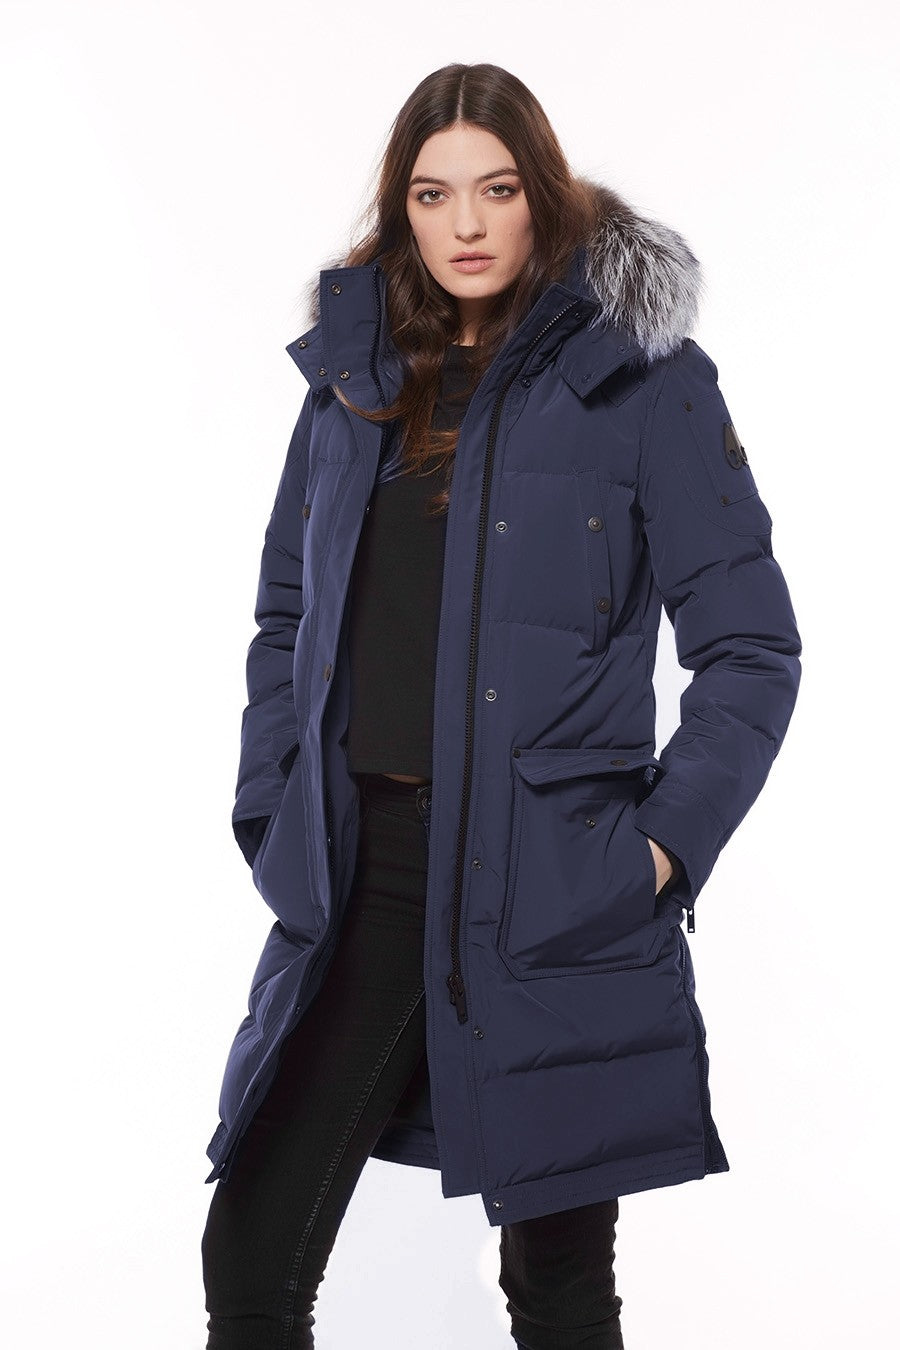 Moose Knuckles Ladies Salmon River Parka - True Navy with White Fur